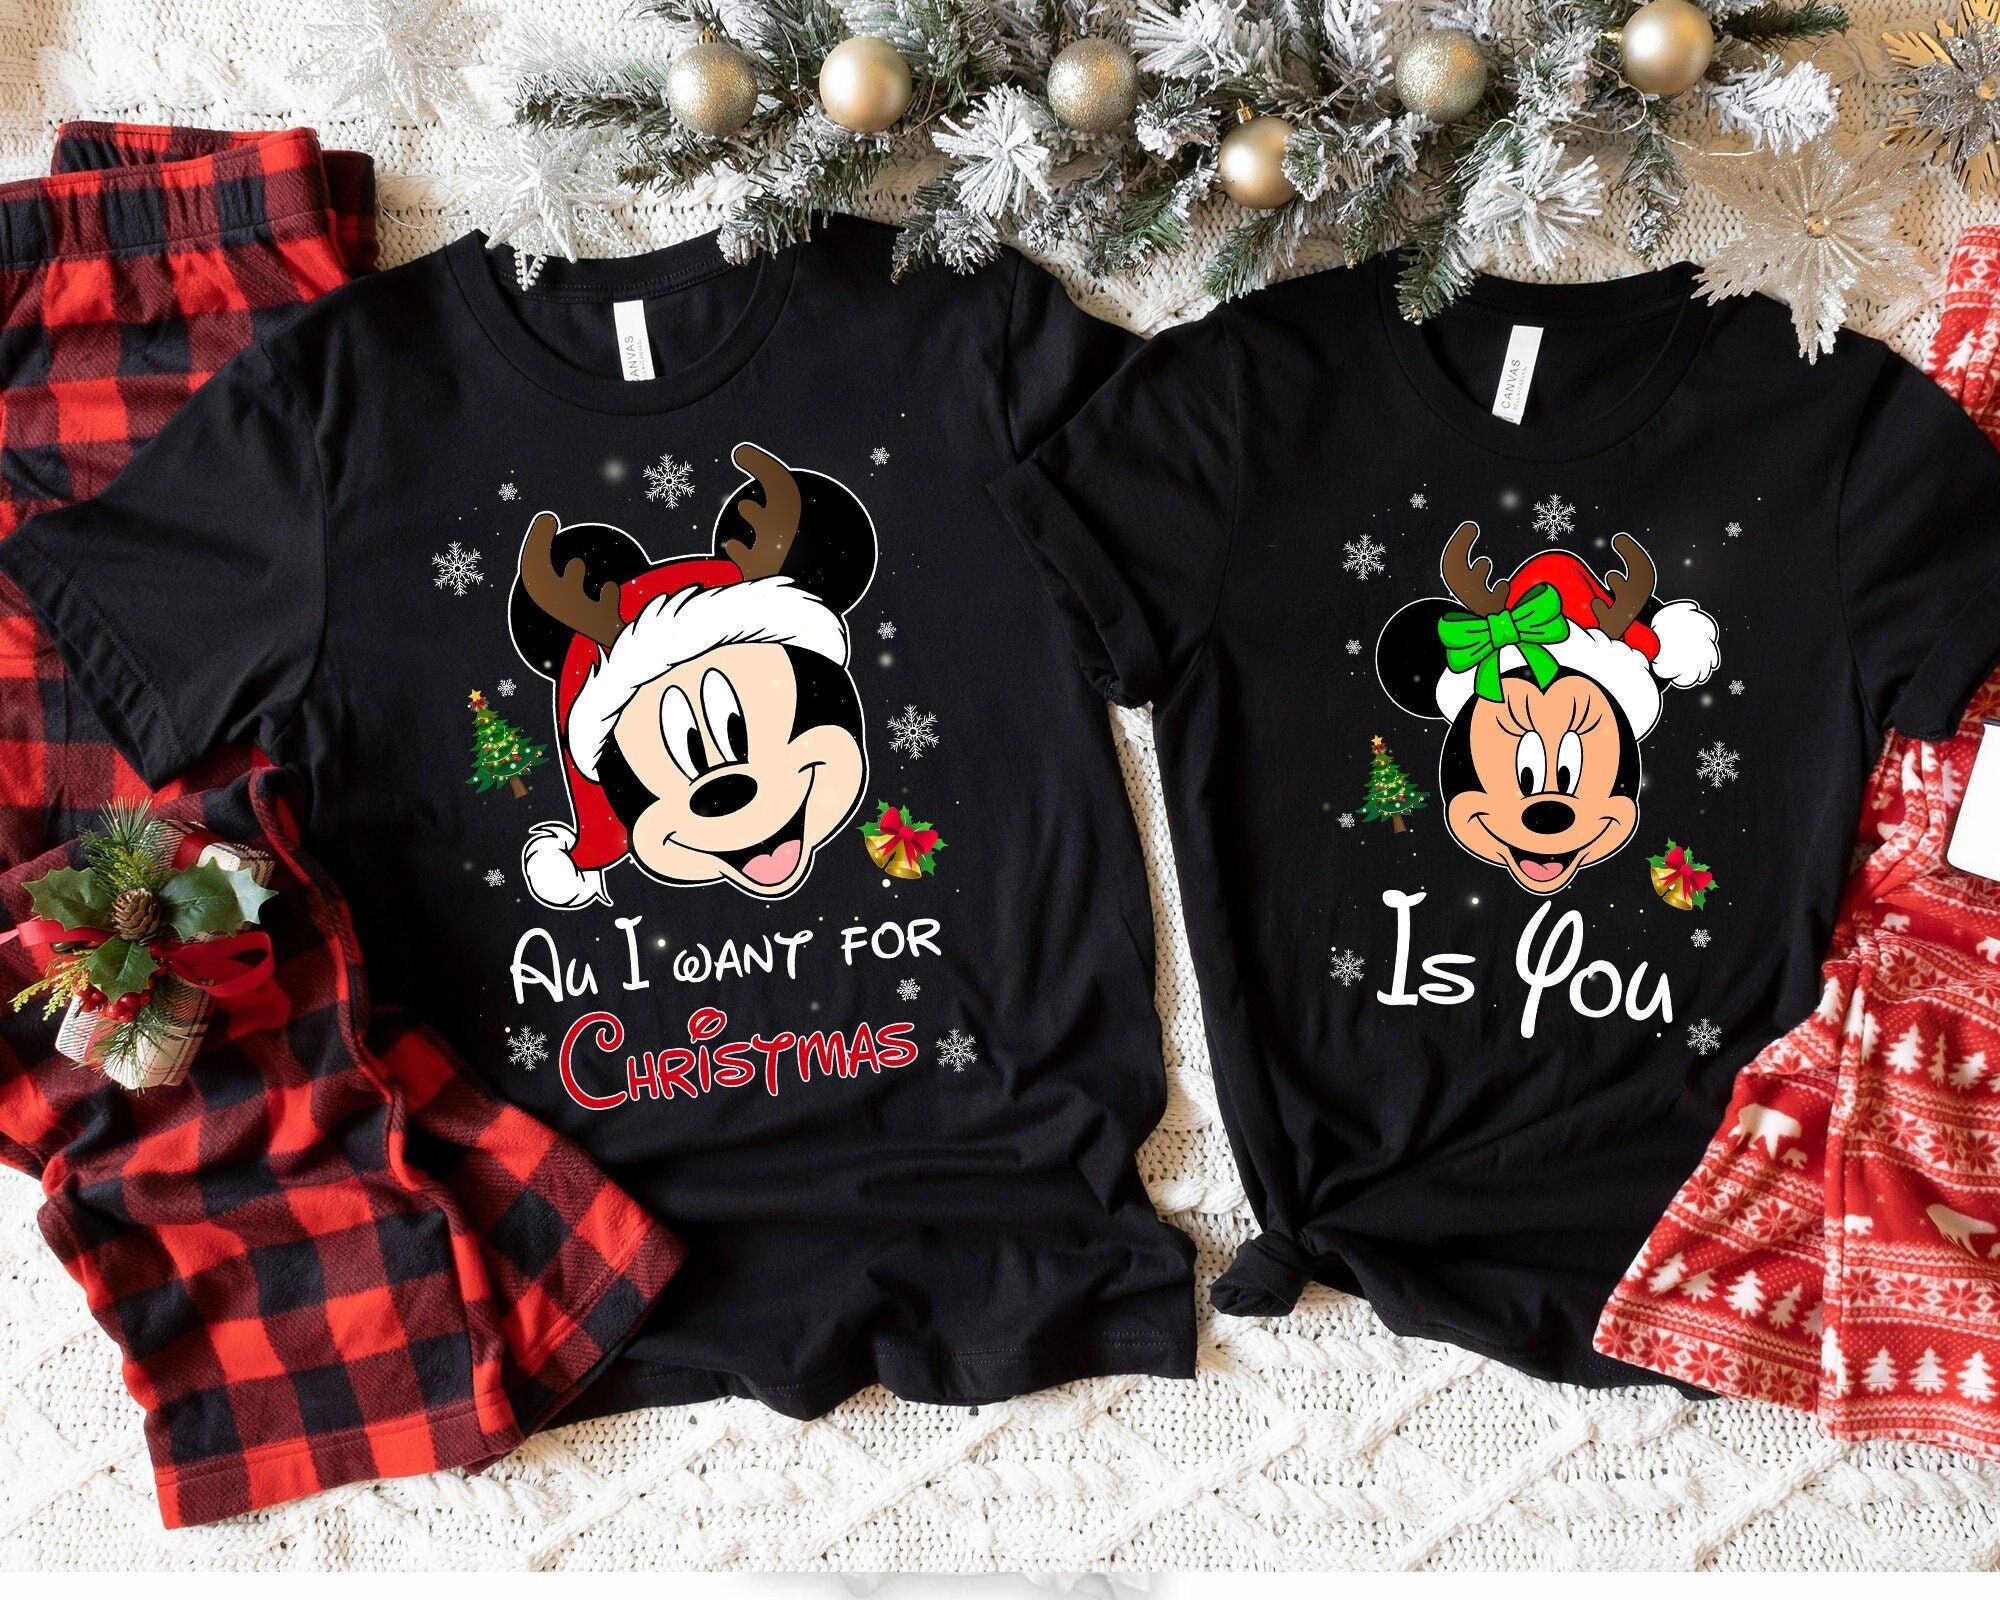 Discover All I Want For Christmas Is You Shirt, Couples Disney Mickey Holiday Shirt